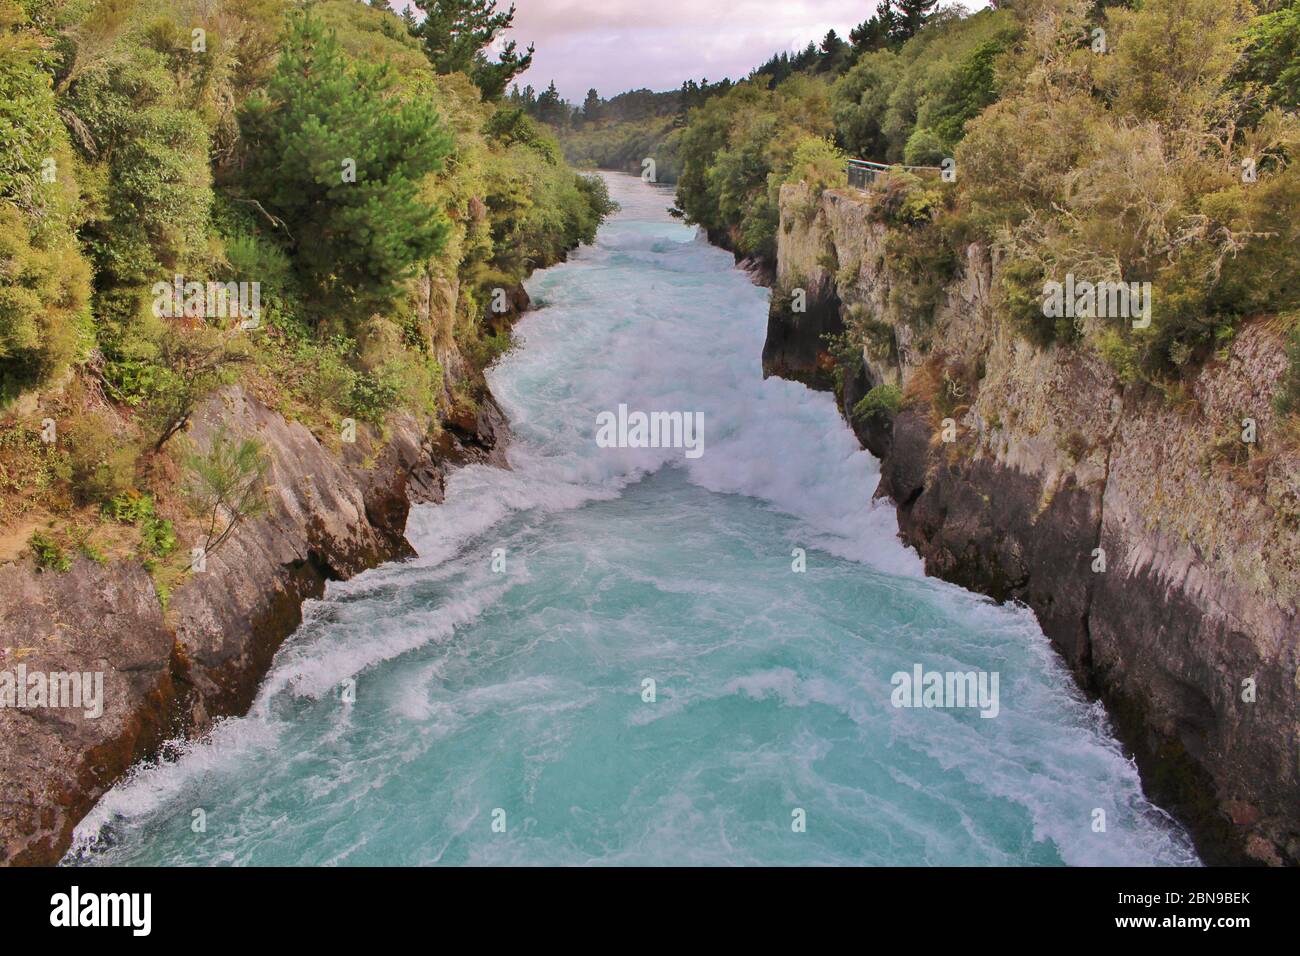 Symmetric Photo of stunning Huka Falls of Waikato River in Taupo District in Waikato Region on the North Island in New Zealand. The massive, powerfull Stock Photo